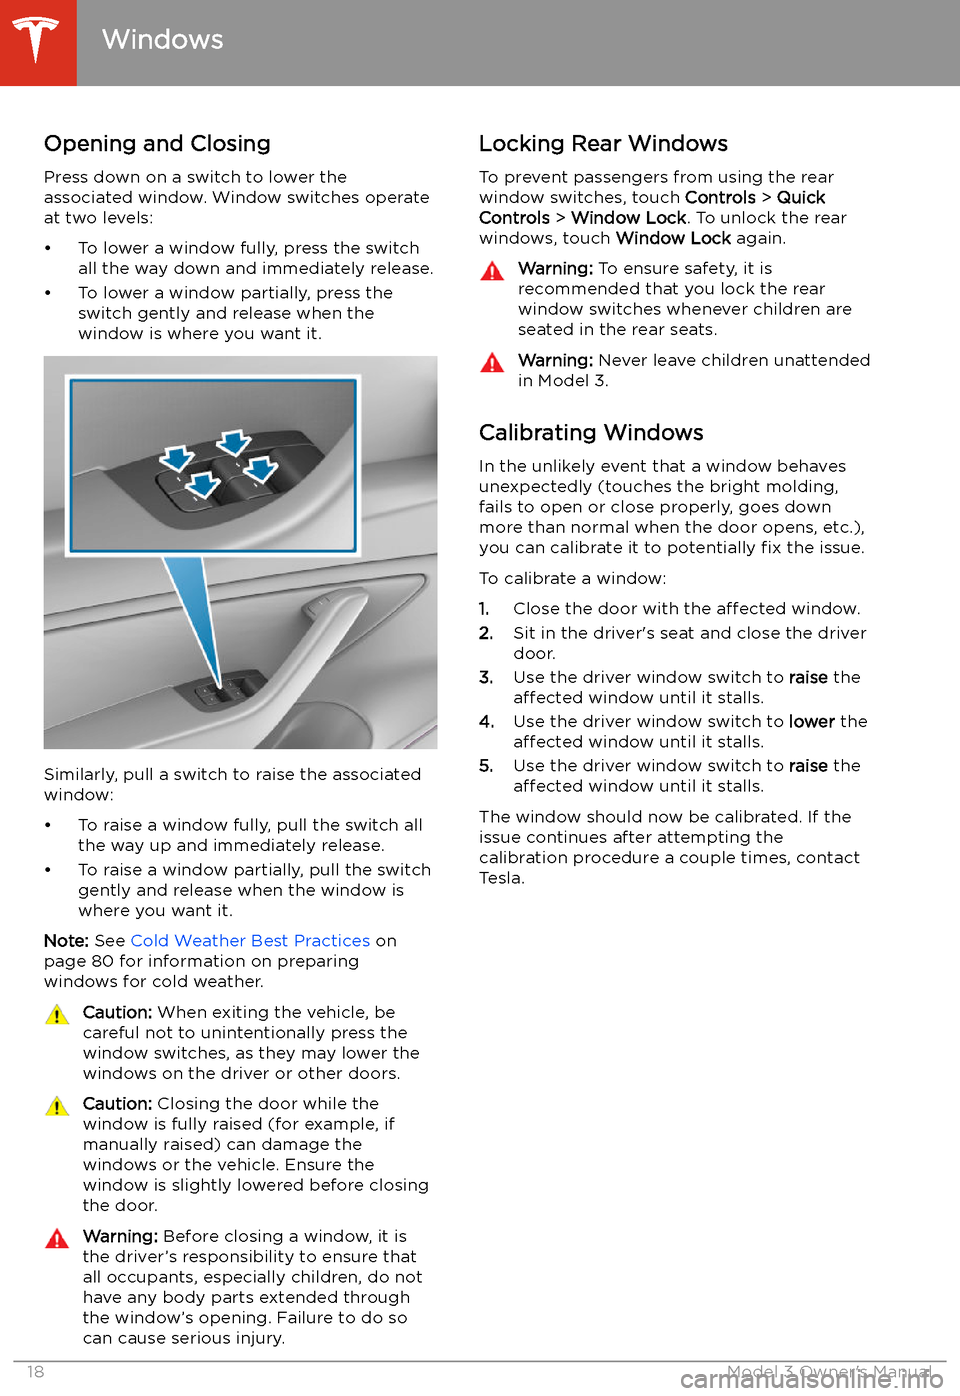 TESLA MODEL 3 2020  s User Guide Windows
Opening and Closing
Press down on a switch to lower the
associated window. Window switches operate
at two levels:
